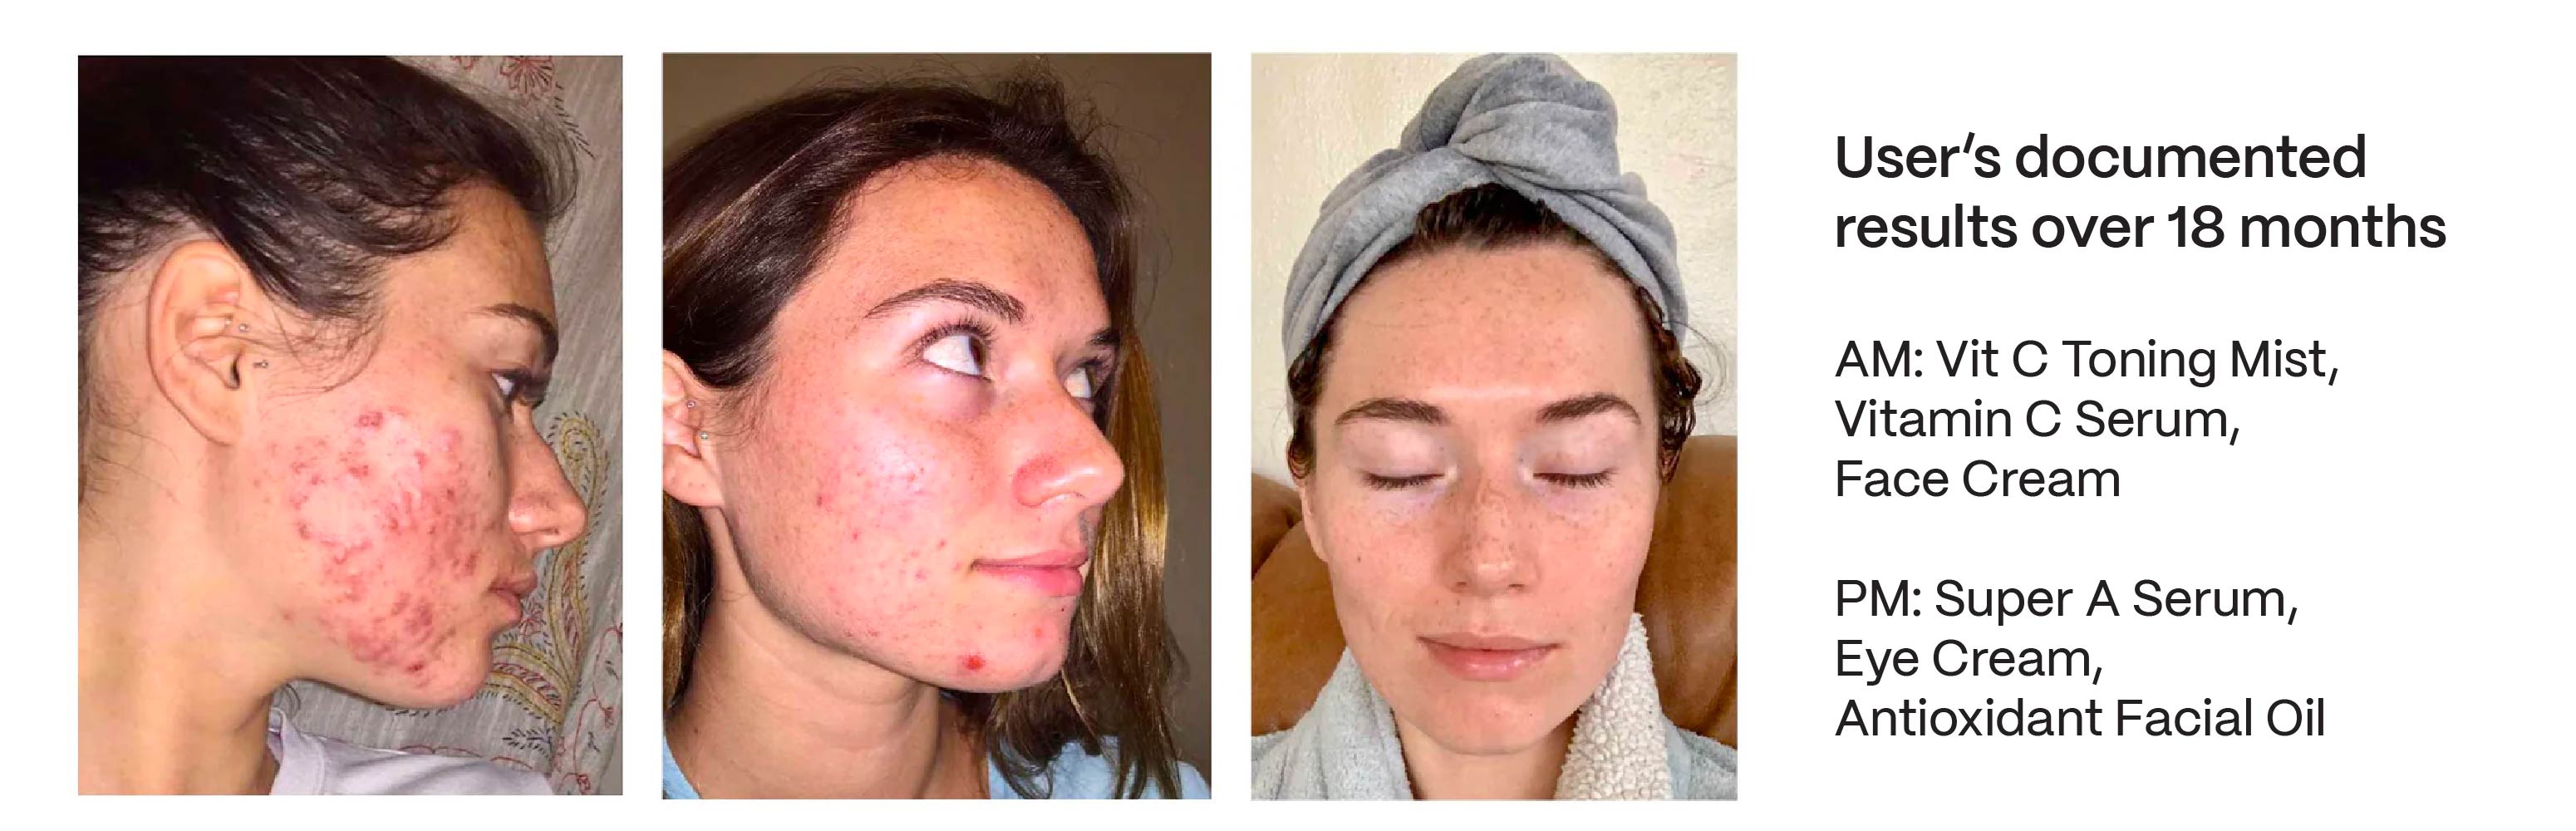 Acne before and after 